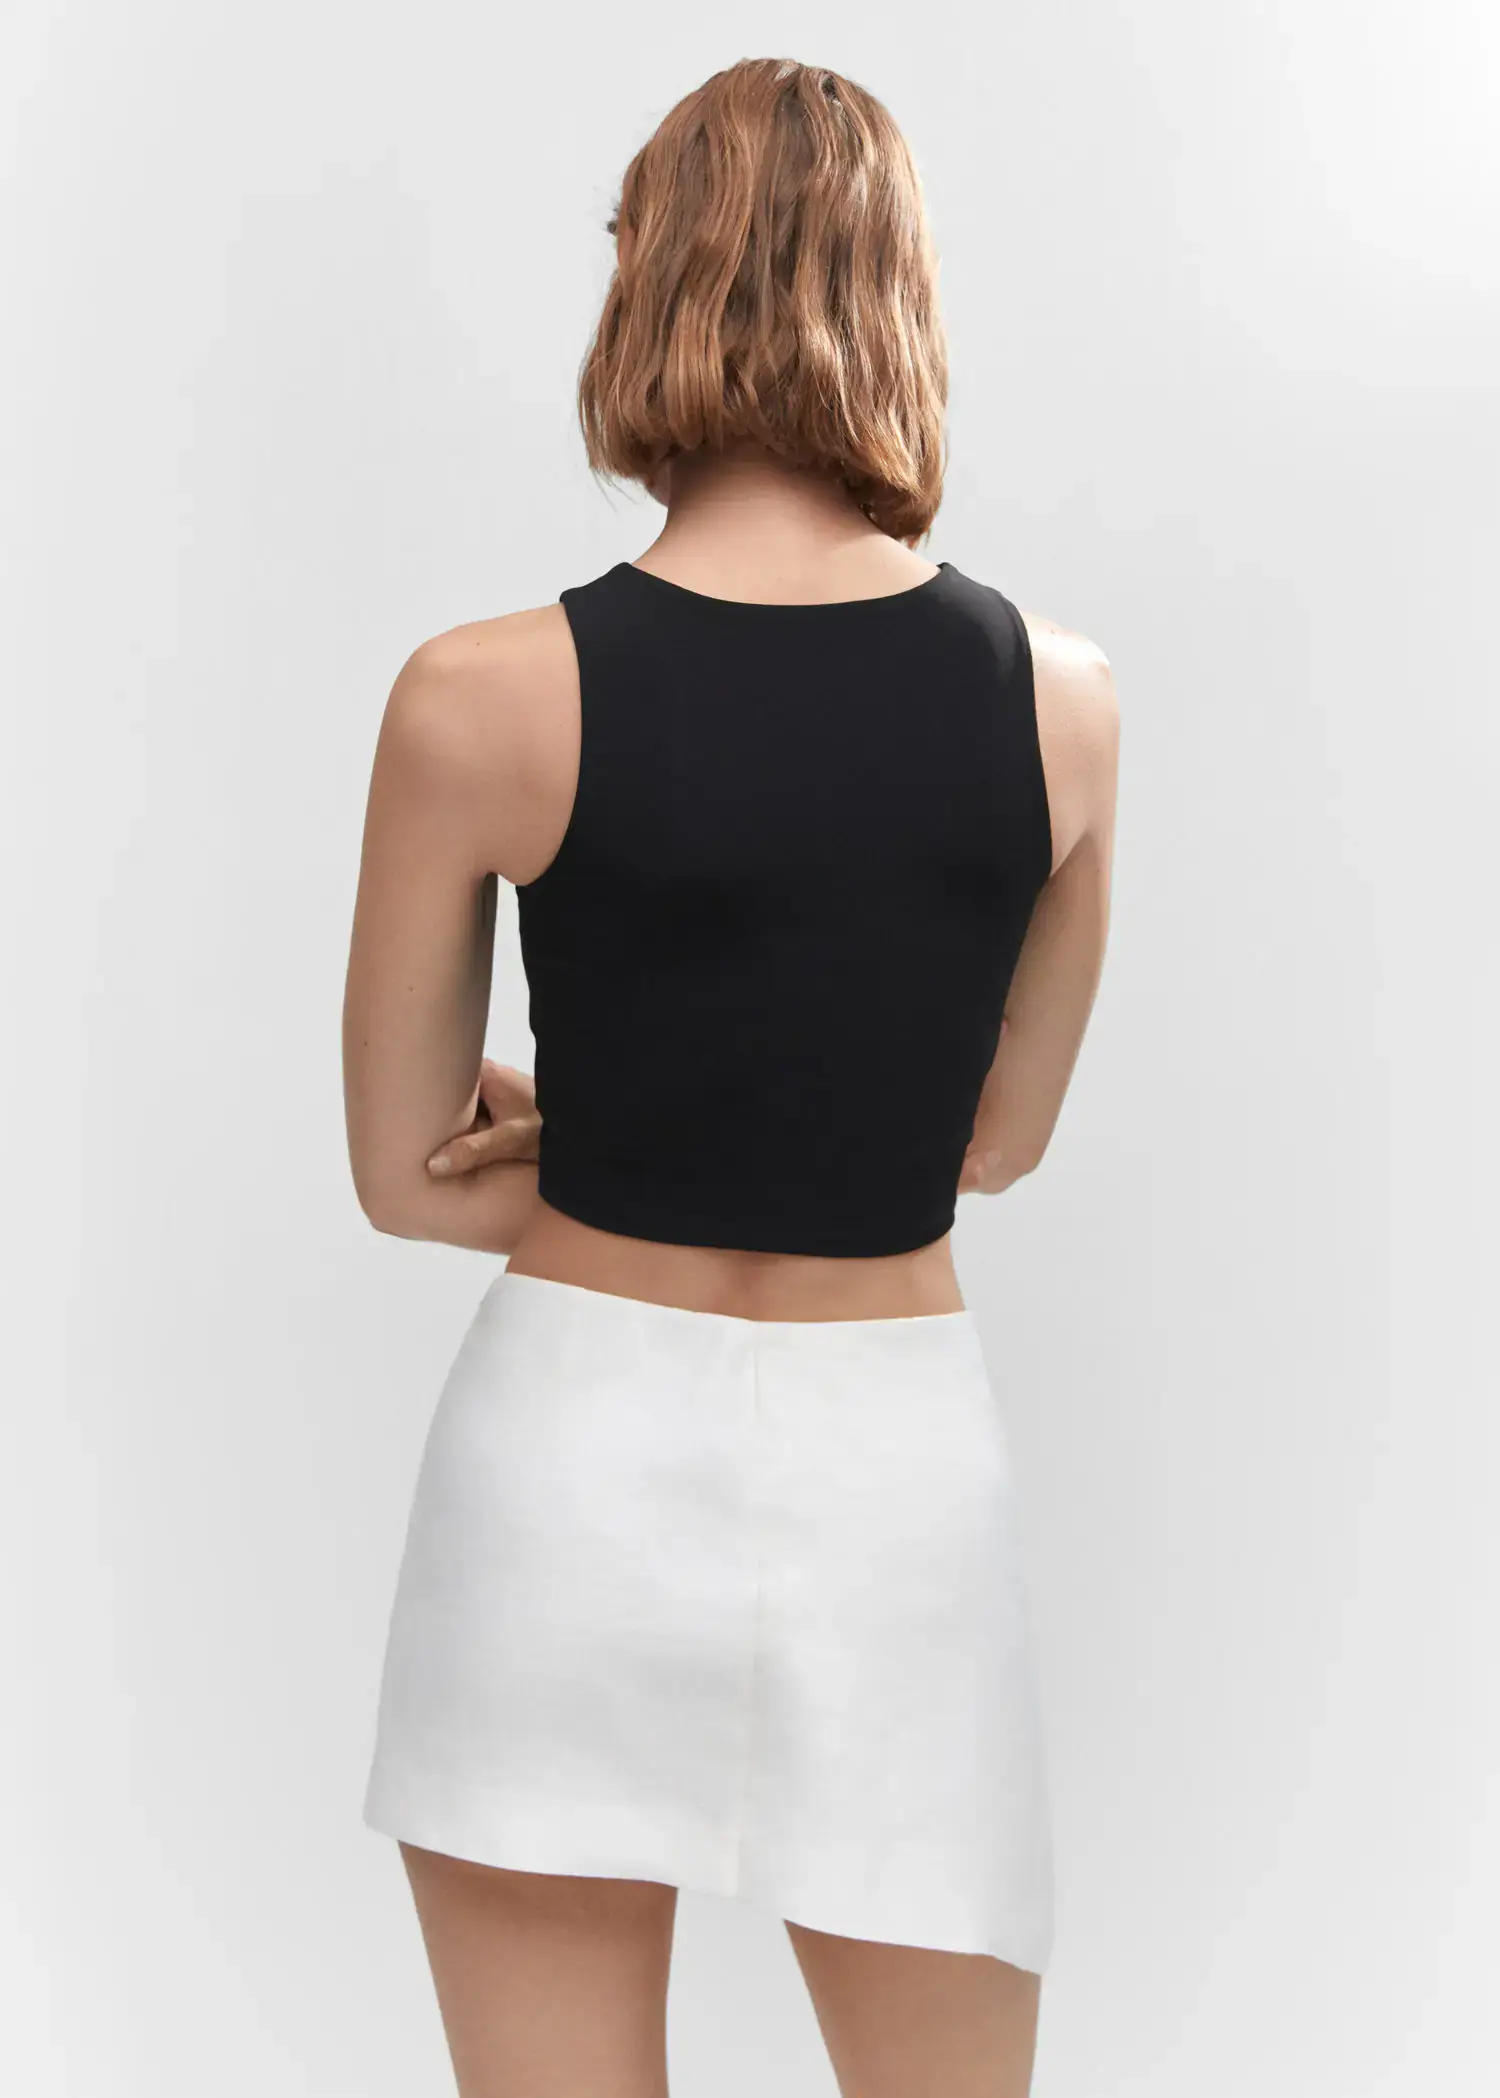 Mango Crop top with halter neck. a woman wearing a black top and white skirt. 